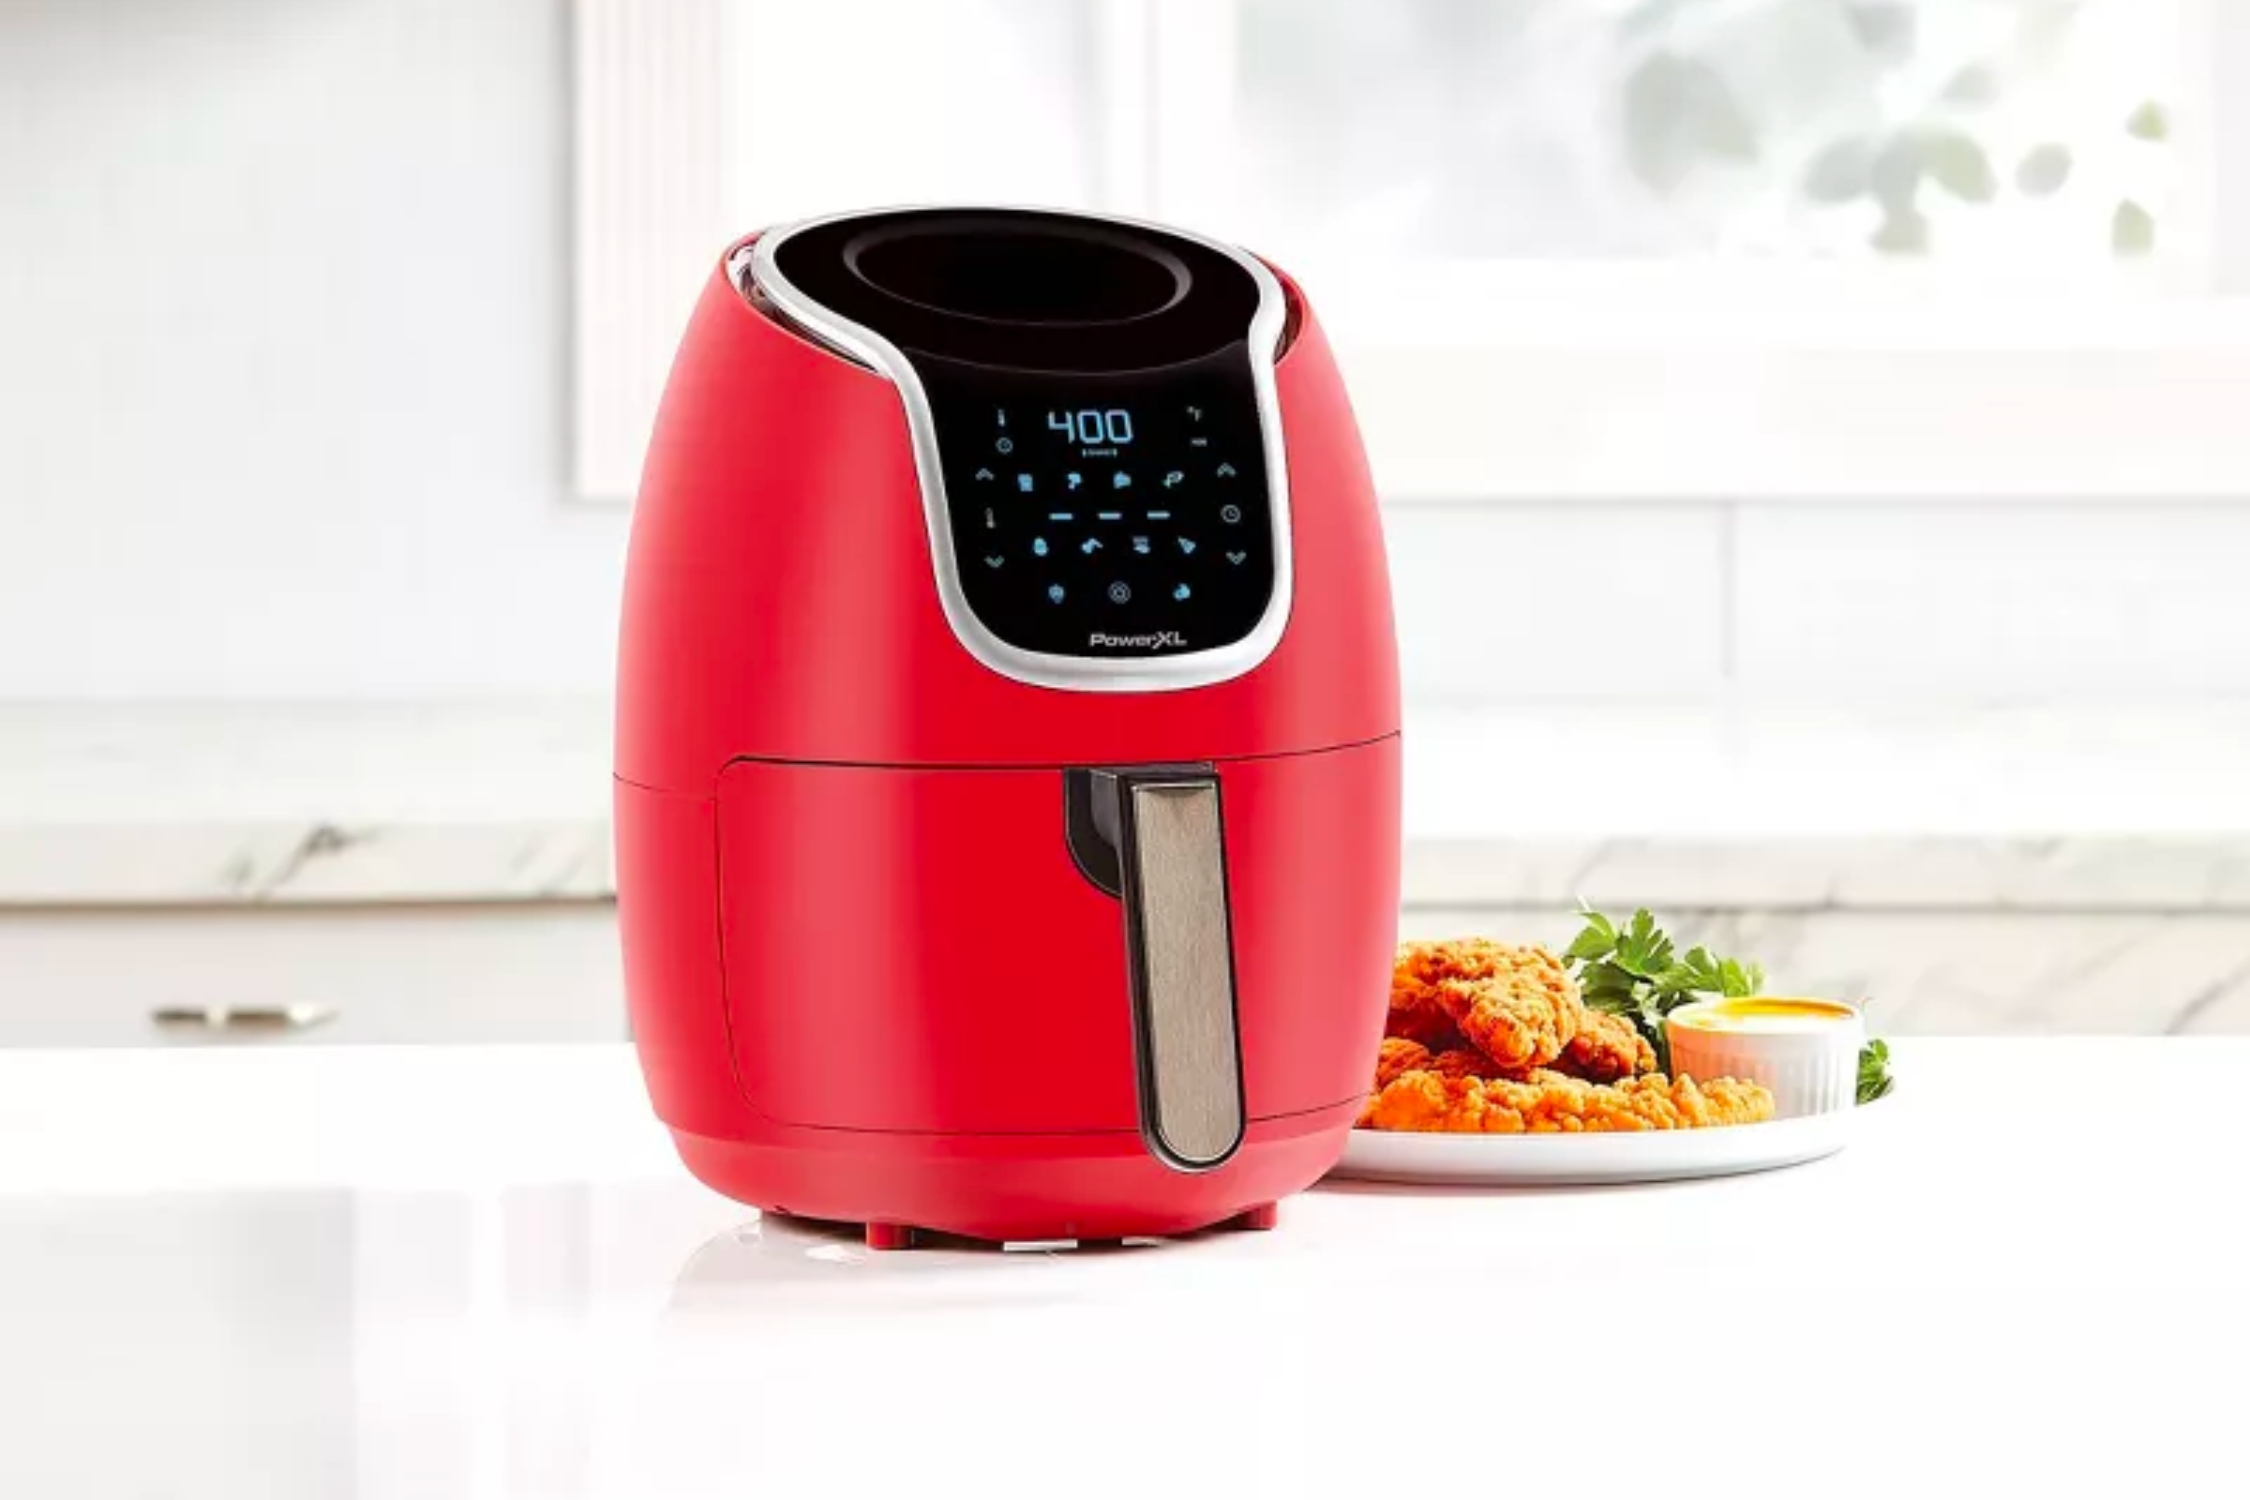 Avoid putting these kinds of food in an air fryer at all costs